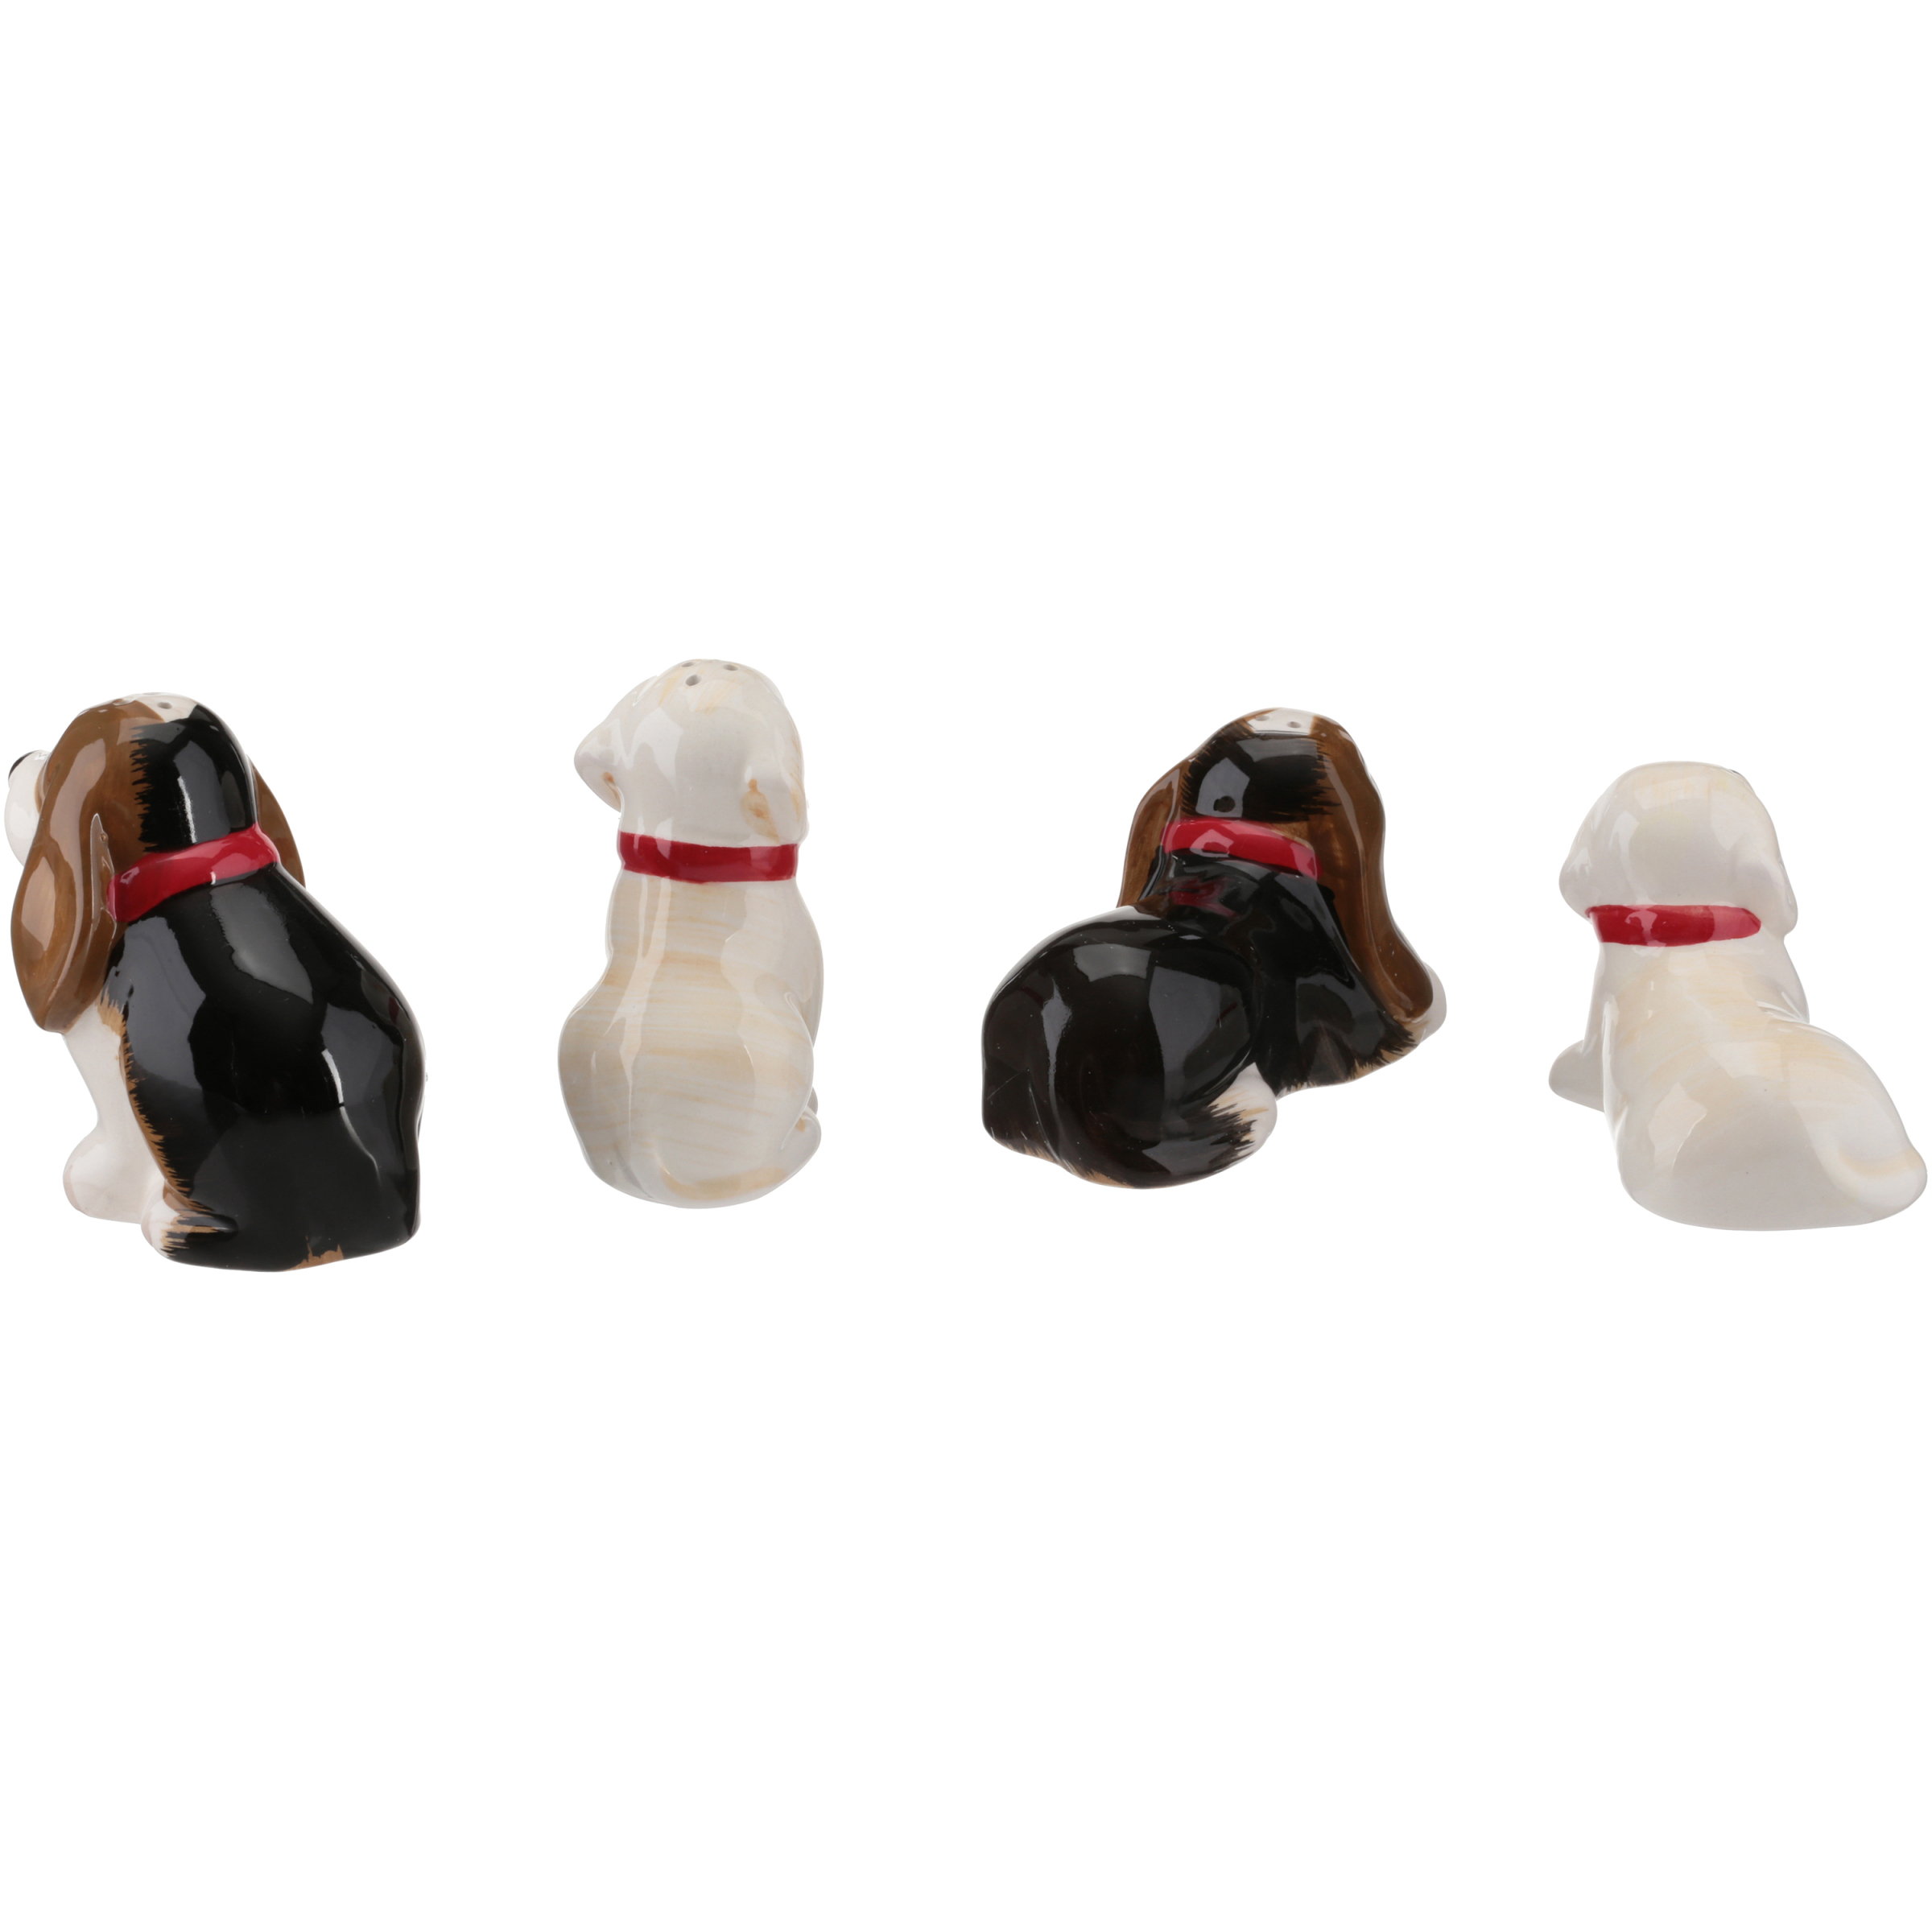 The Pioneer Woman Autumn Harvest Charlie & Walter And Lucy & Duke Salt and Pepper Shakers Set - image 2 of 4